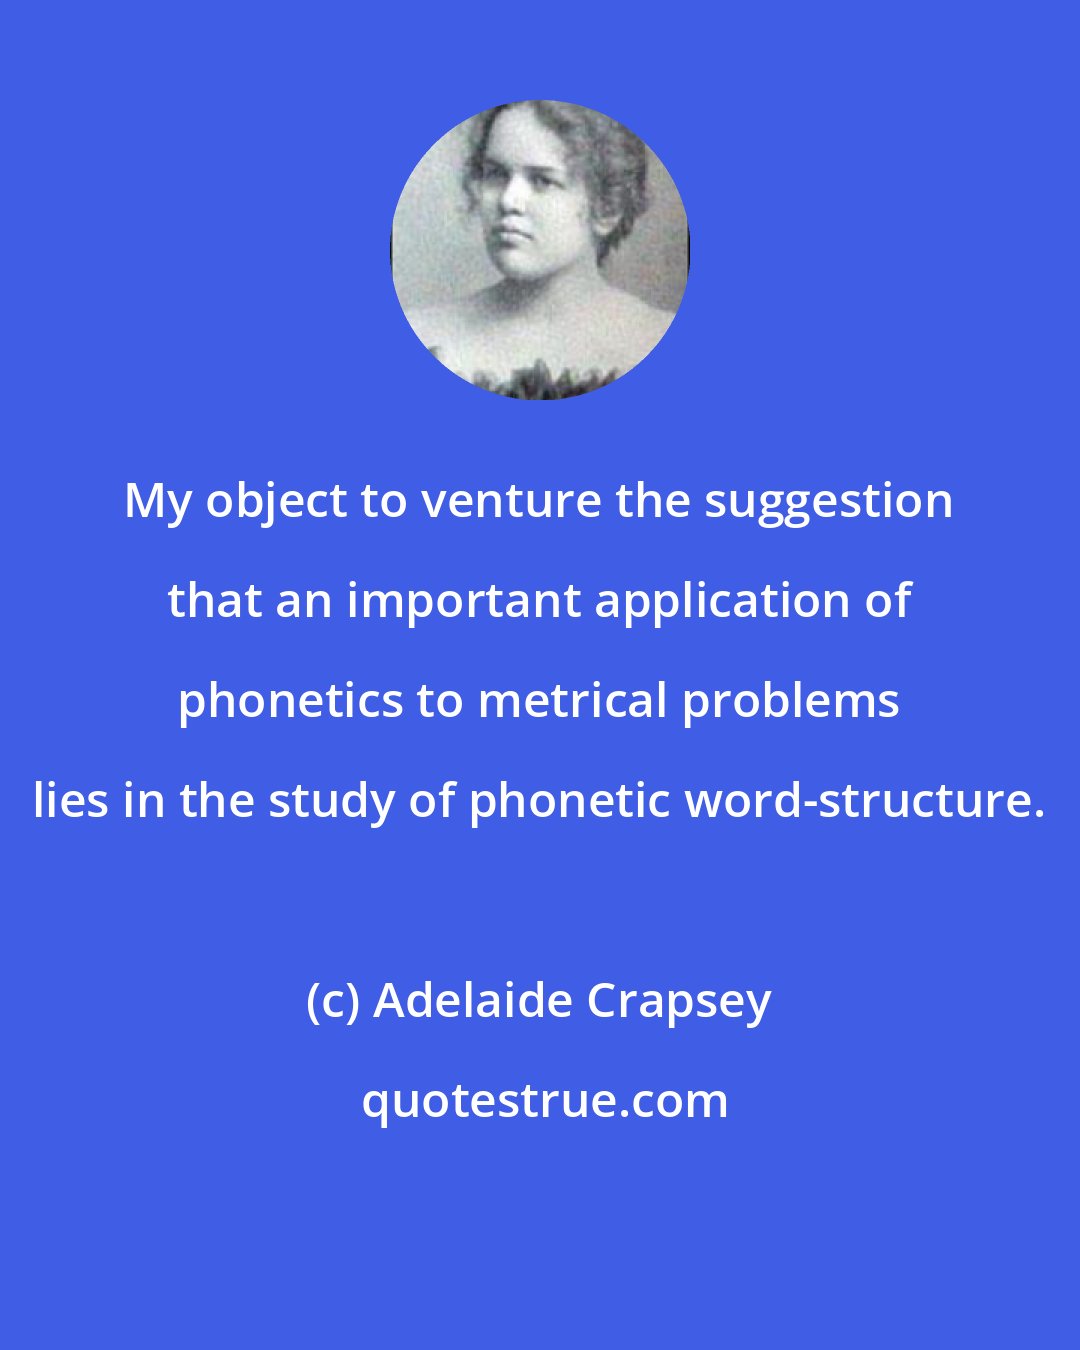 Adelaide Crapsey: My object to venture the suggestion that an important application of phonetics to metrical problems lies in the study of phonetic word-structure.